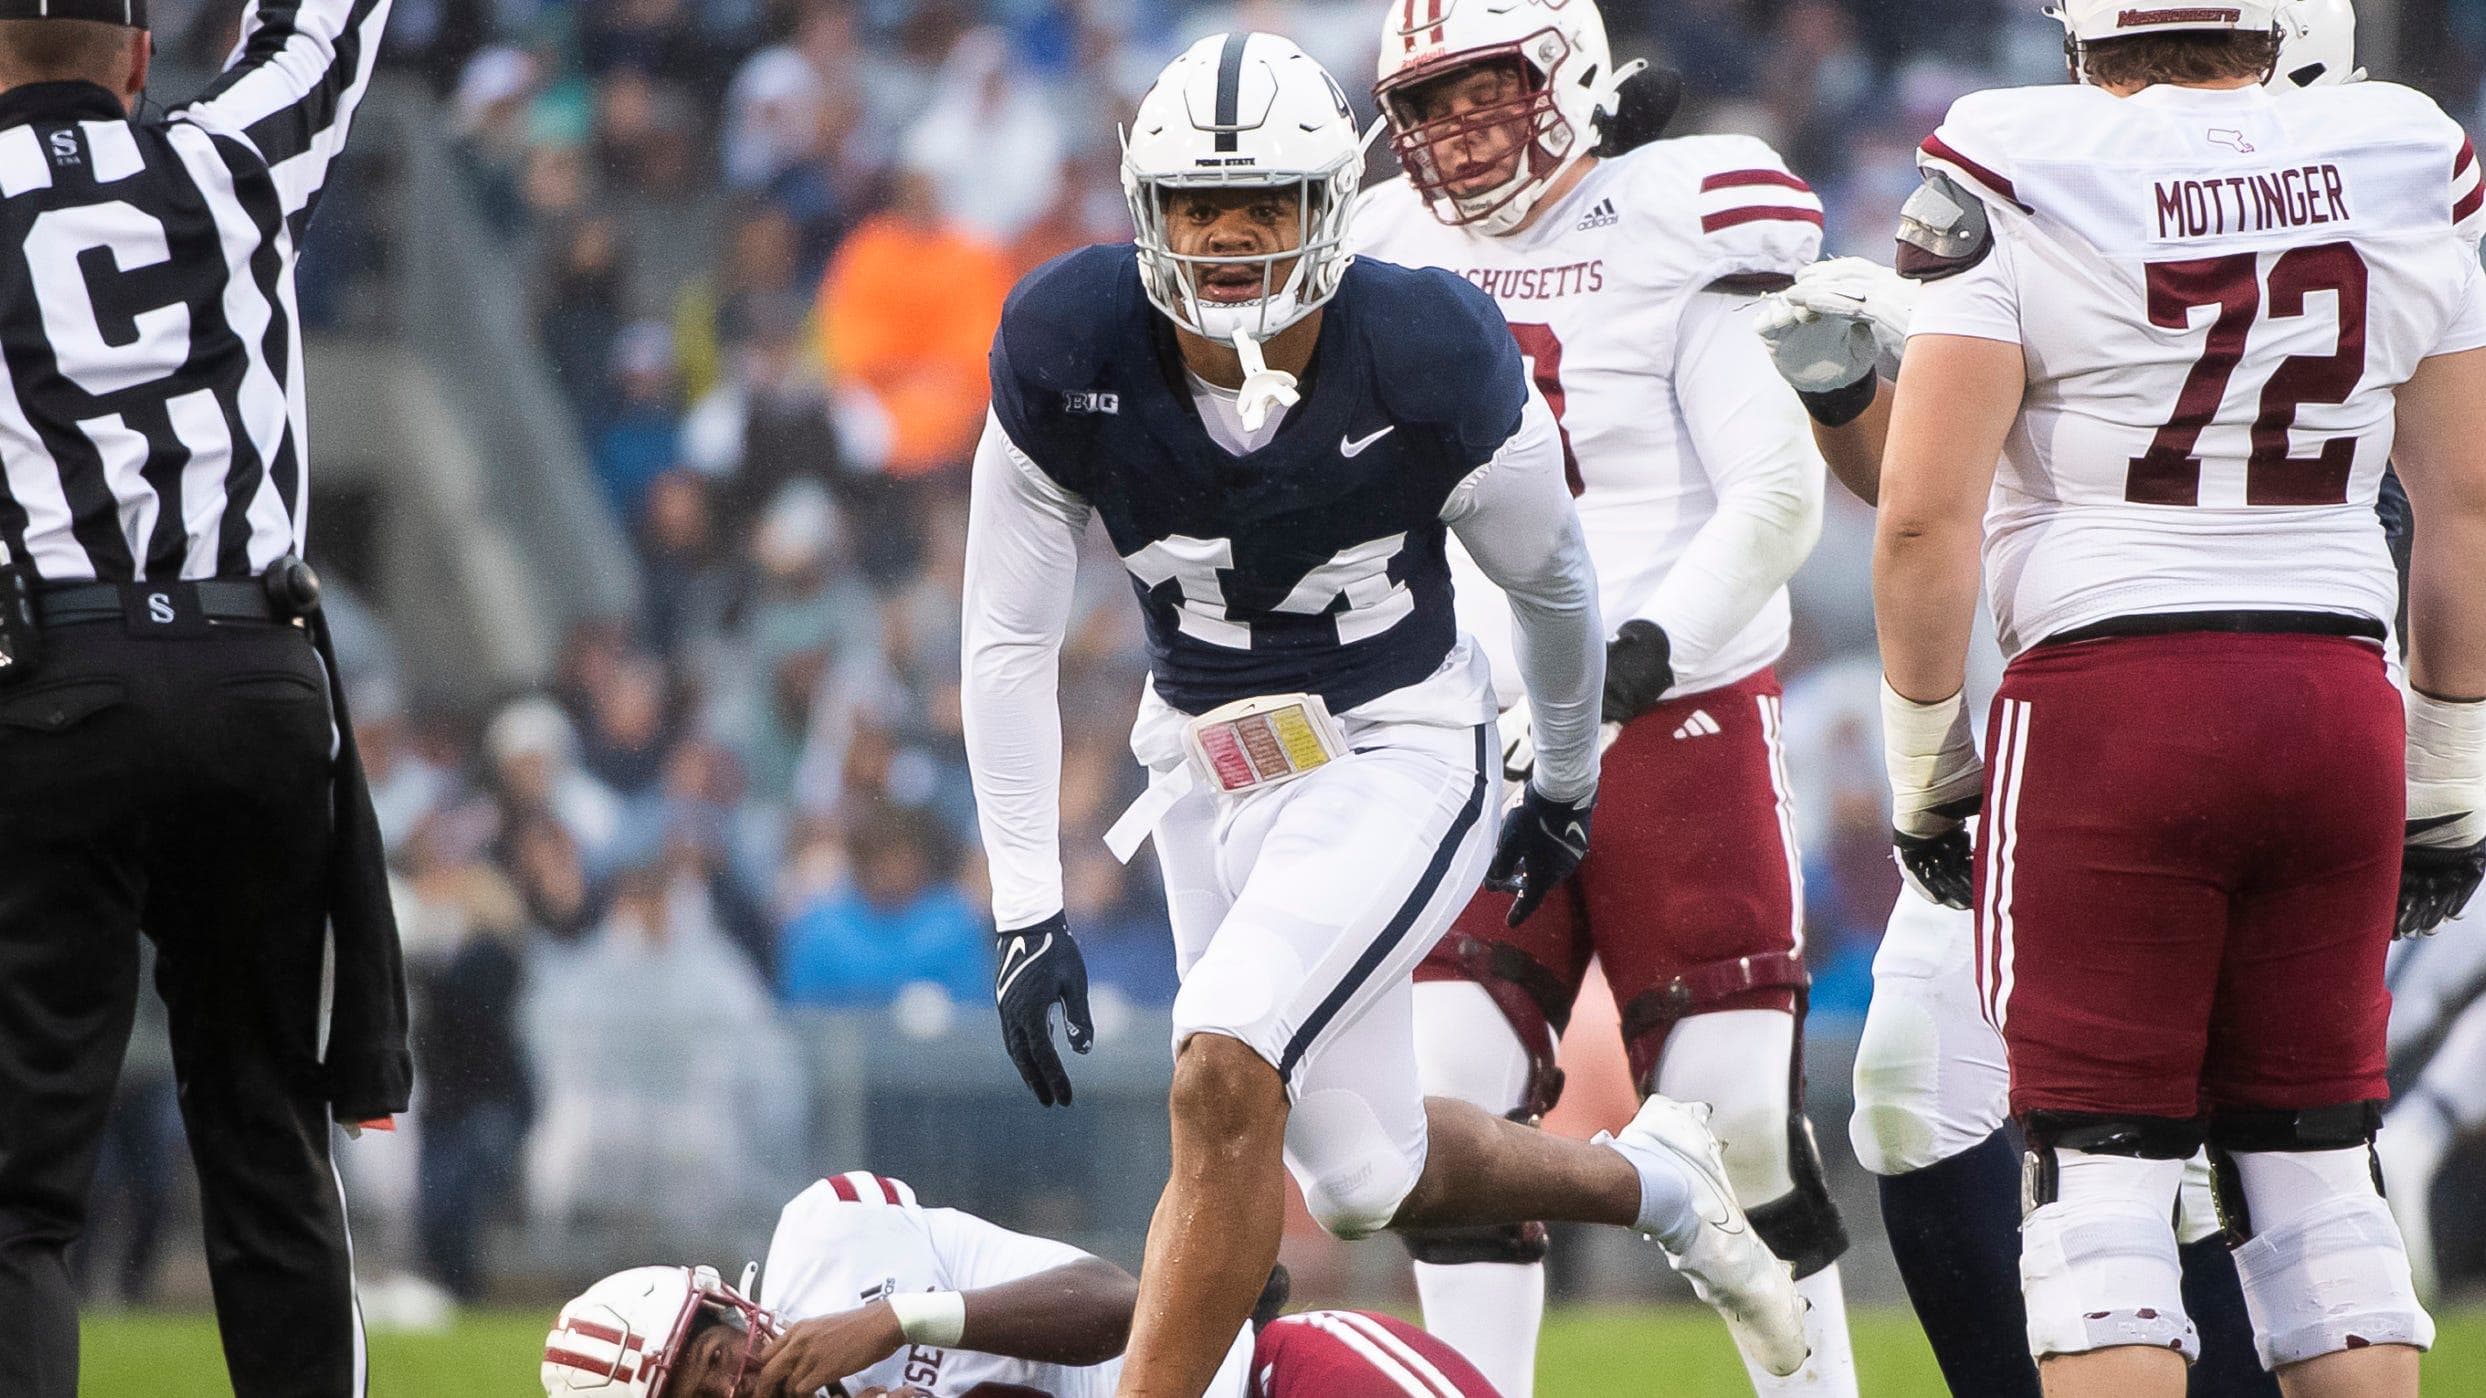 Penn State defensive end Chop Robinson reacts after sacking the Massachusetts quarterback.